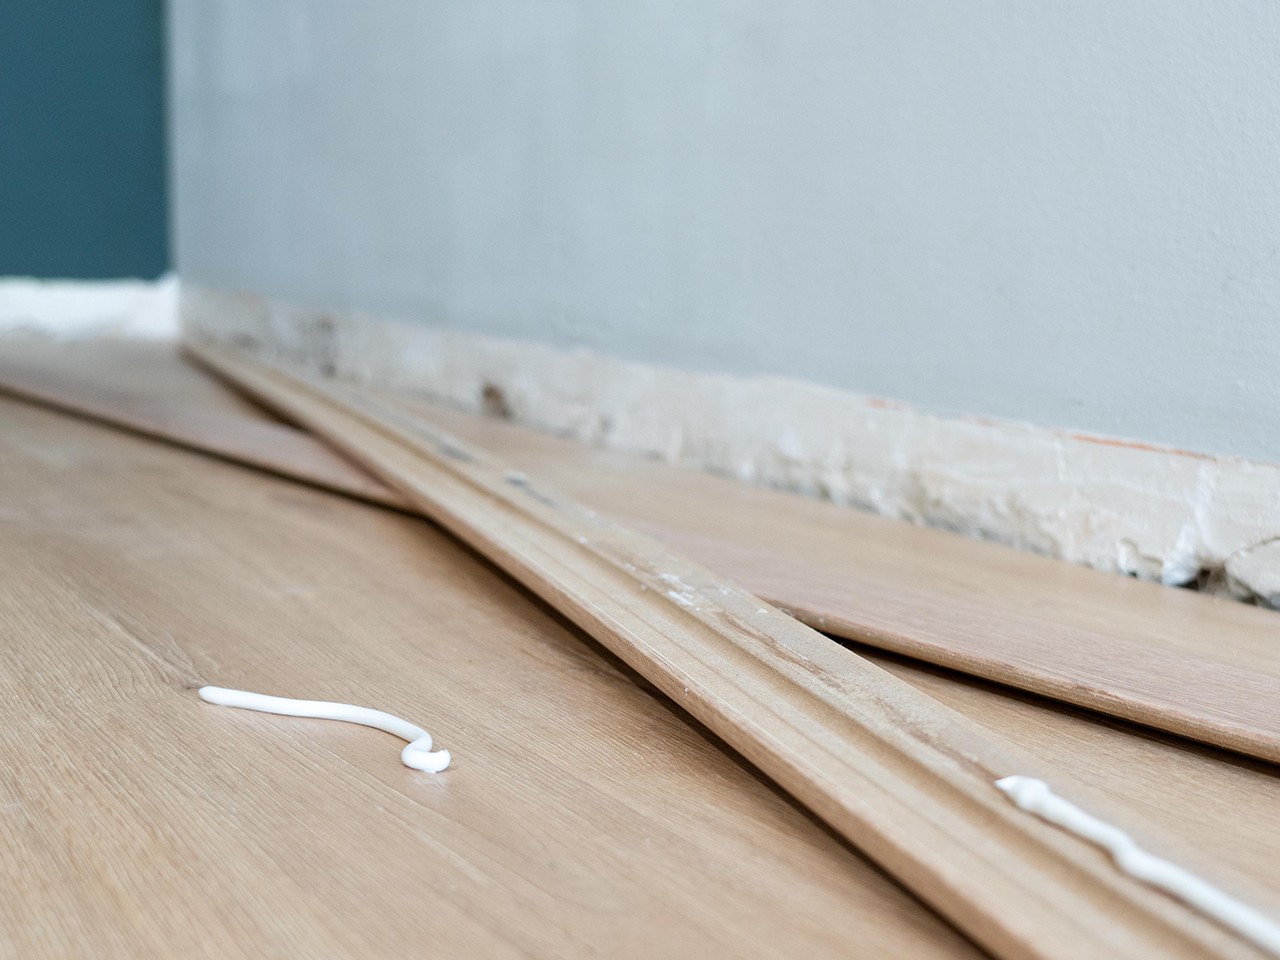 How to Remove Adhesive on Hardwood Floor (with Pictures) - wikiHow